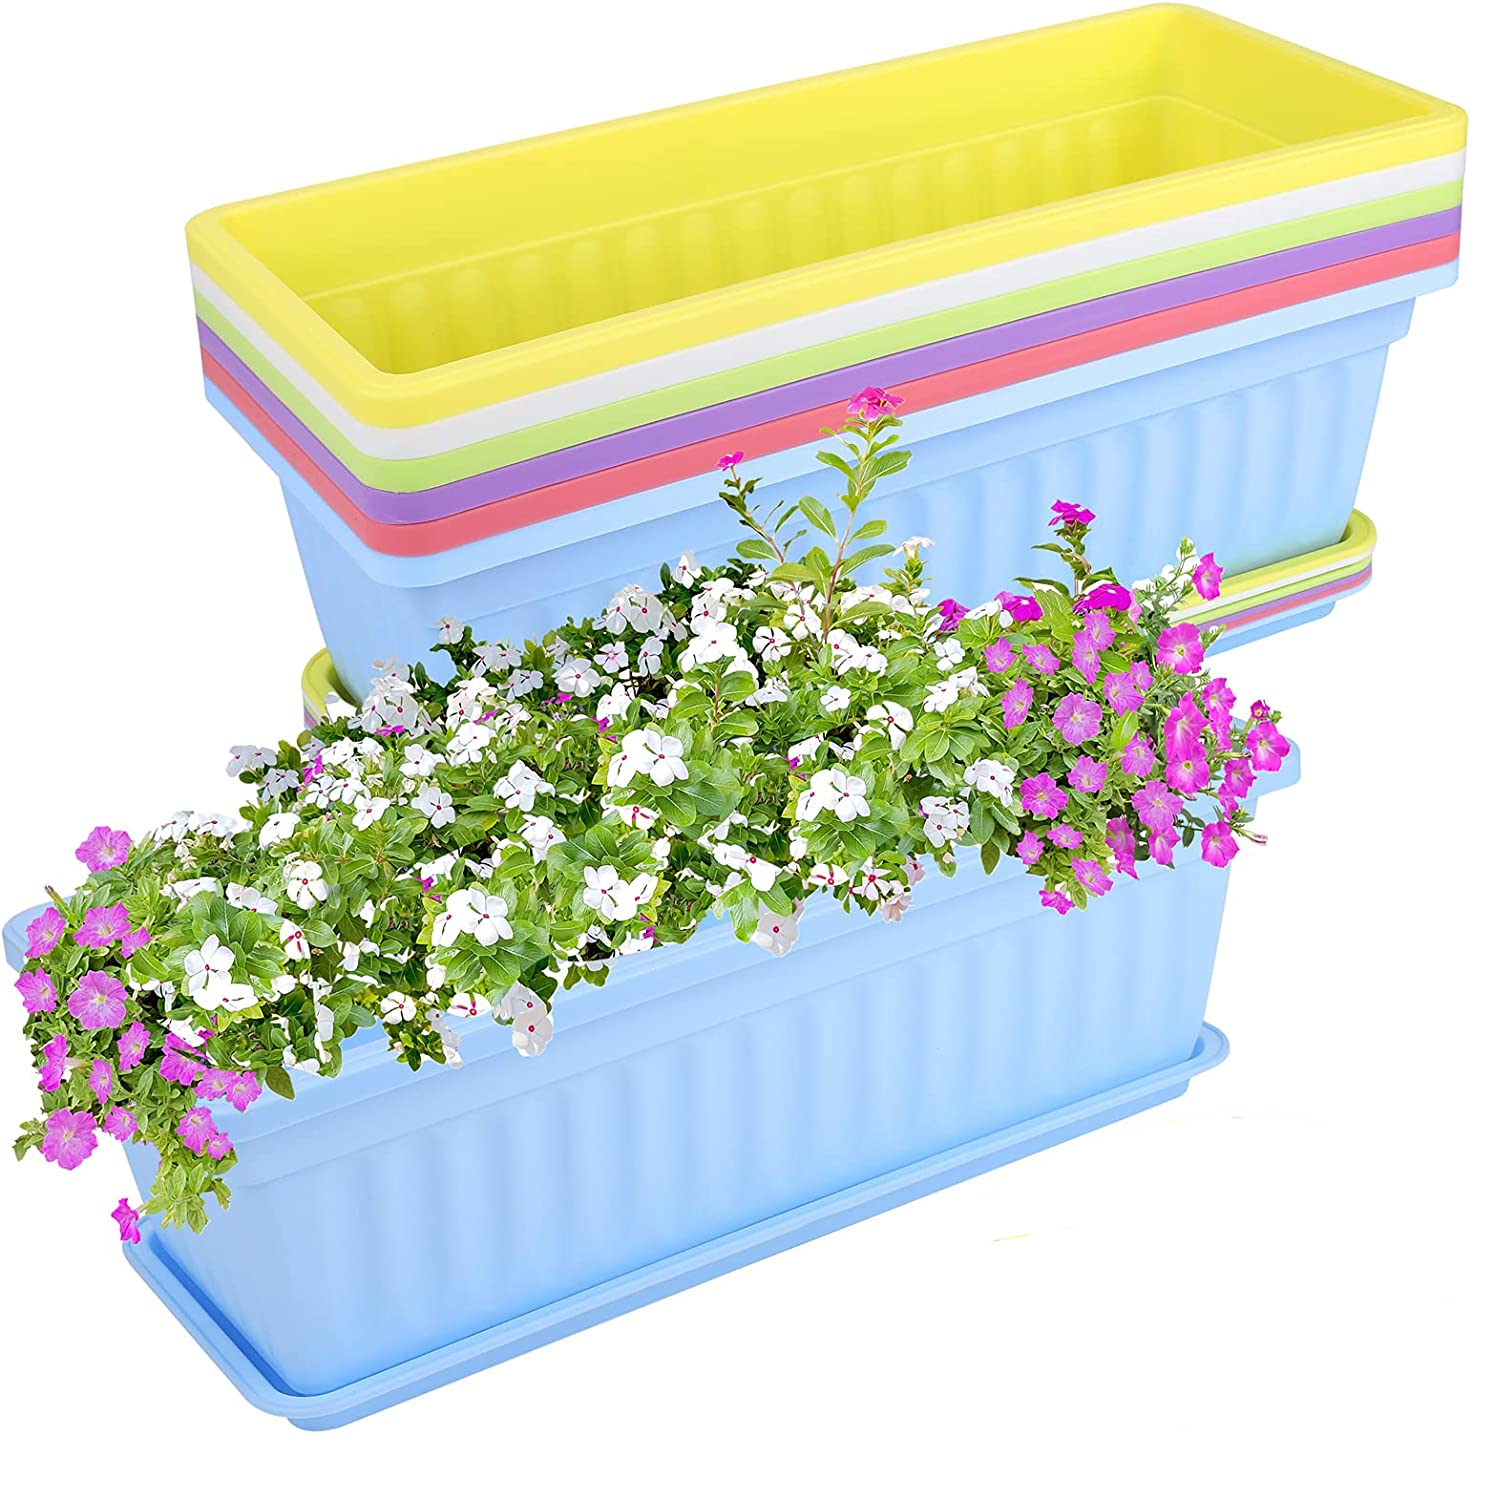 17 Inch Rectangular Plastic Thicken Planters with Trays - Window Planter Box for Outdoor and Indoor Herbs, Vegetables, Flowers and Succulent Plants (1 Pack Blue) - image 3 of 6